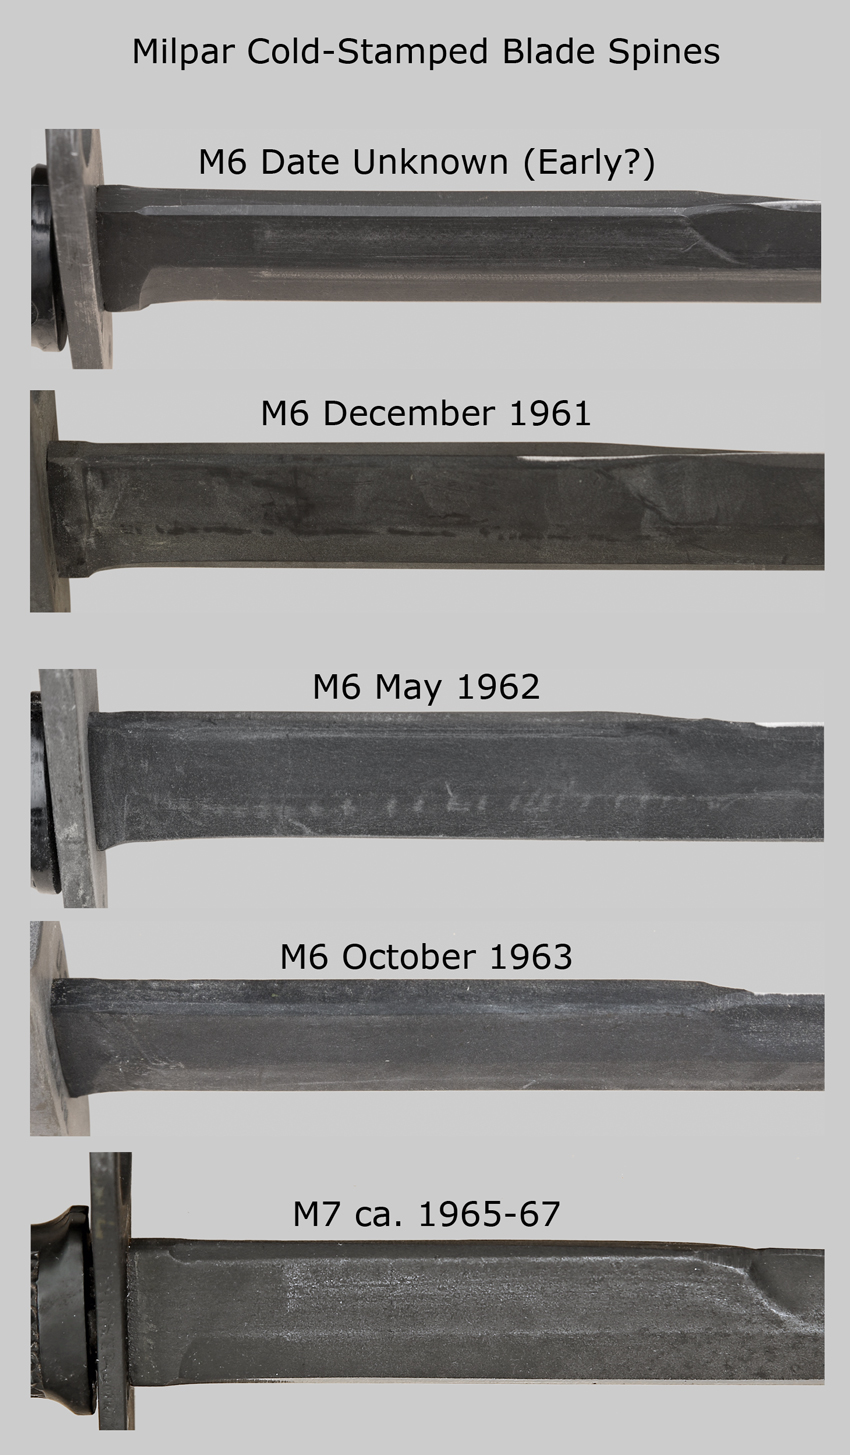 Comparison image showing how Milpar cold-stamped blade spines vary in appearance.